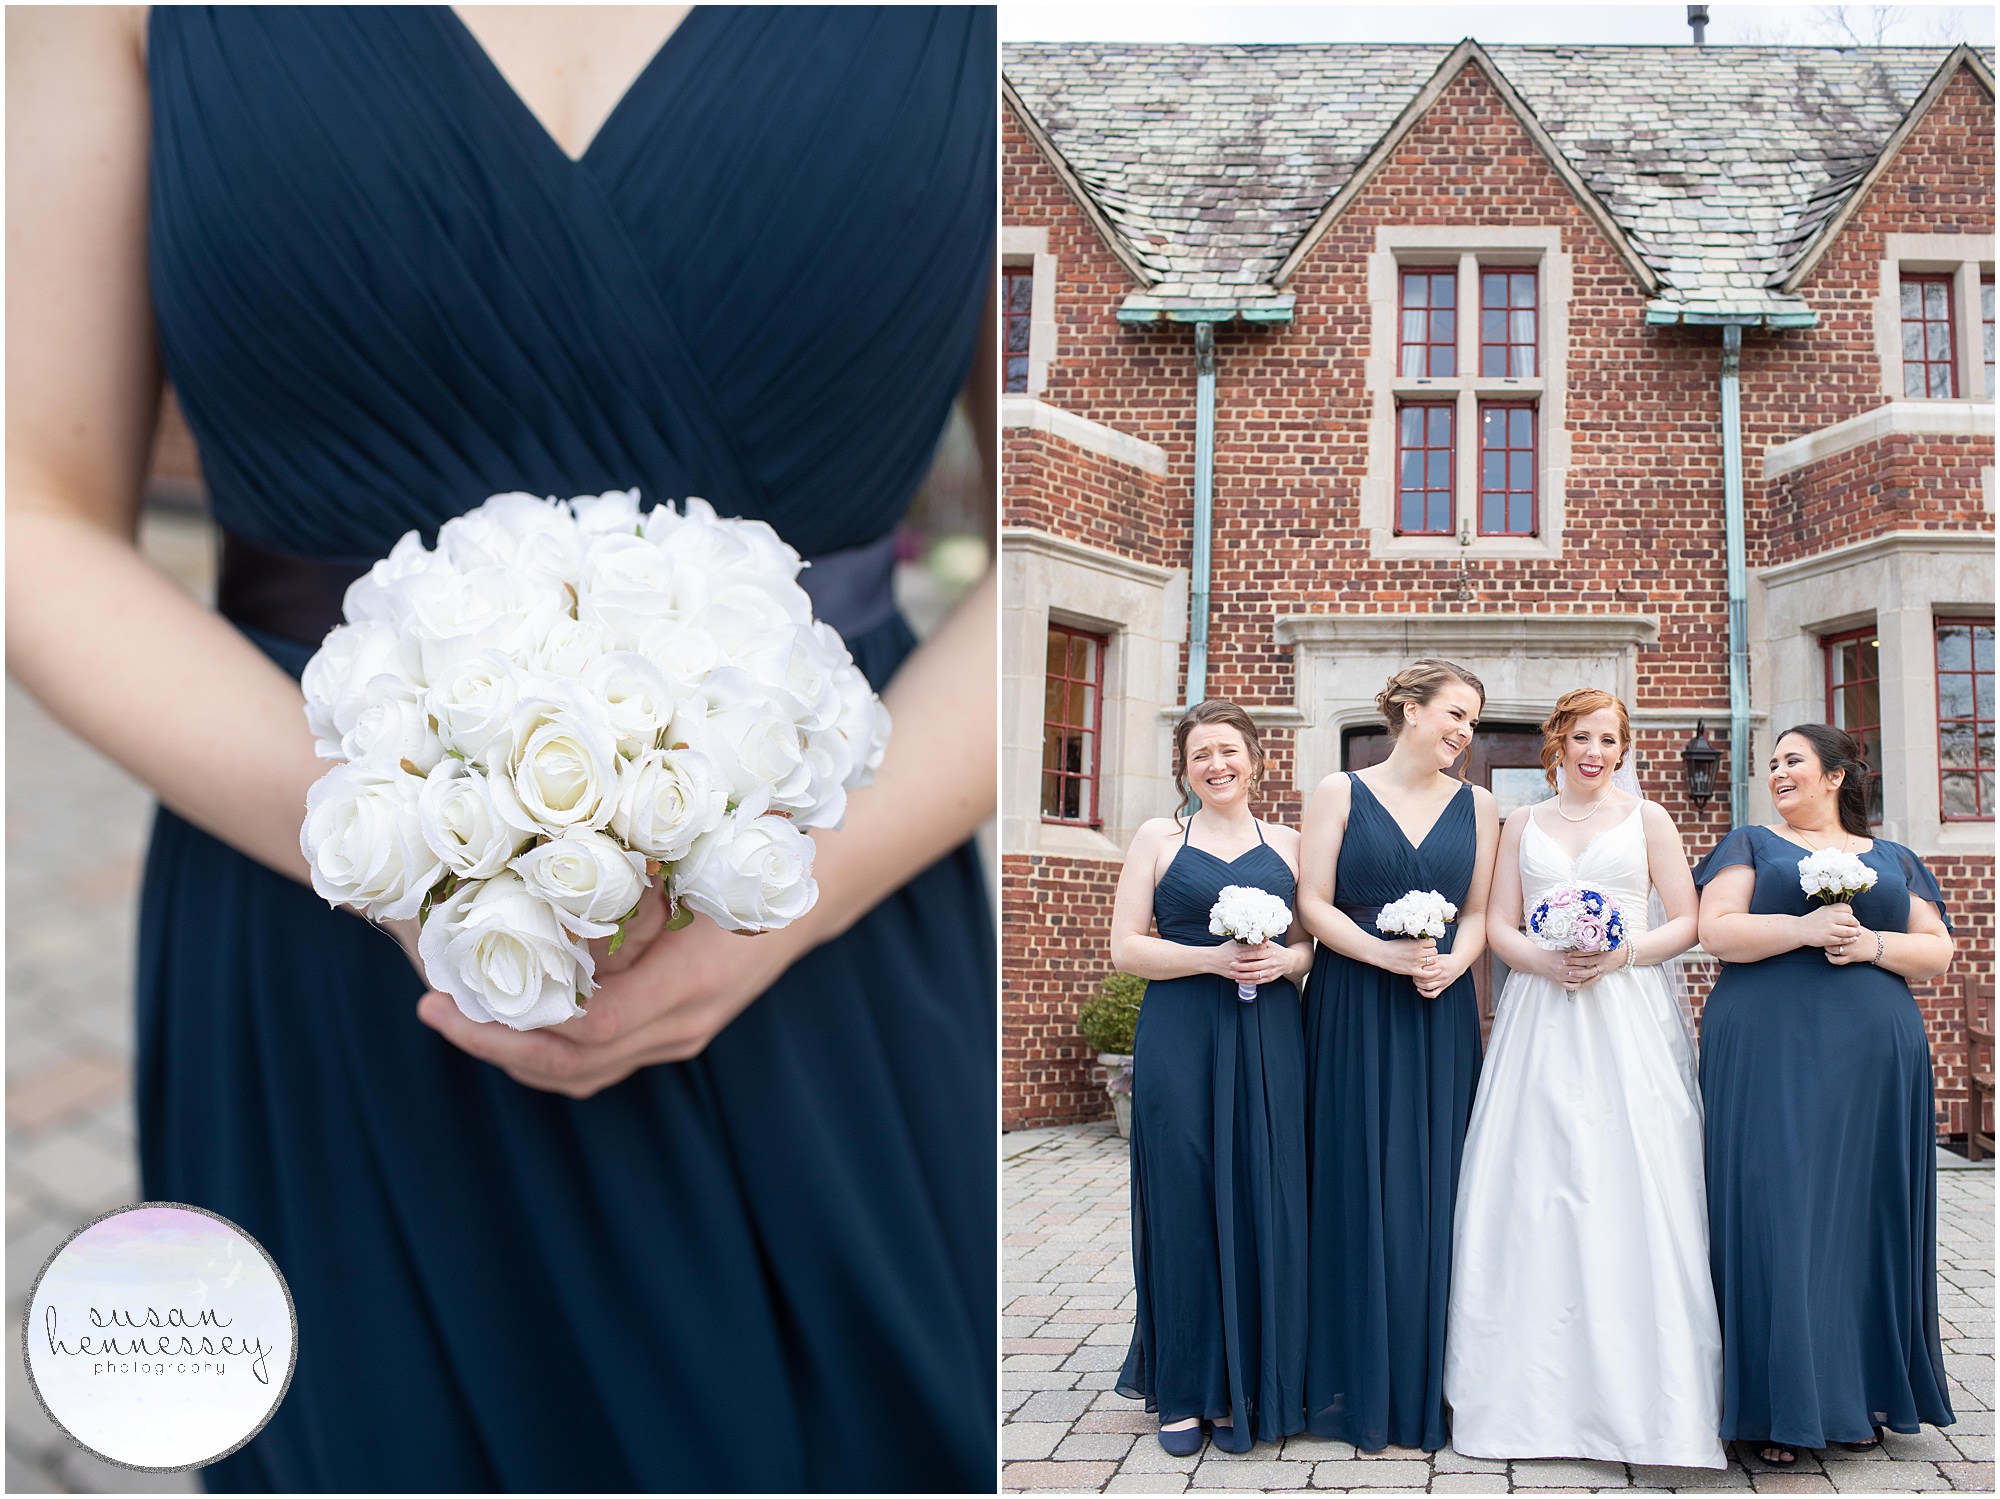 Bride and bridesmaids at Moorestown Community House wedding